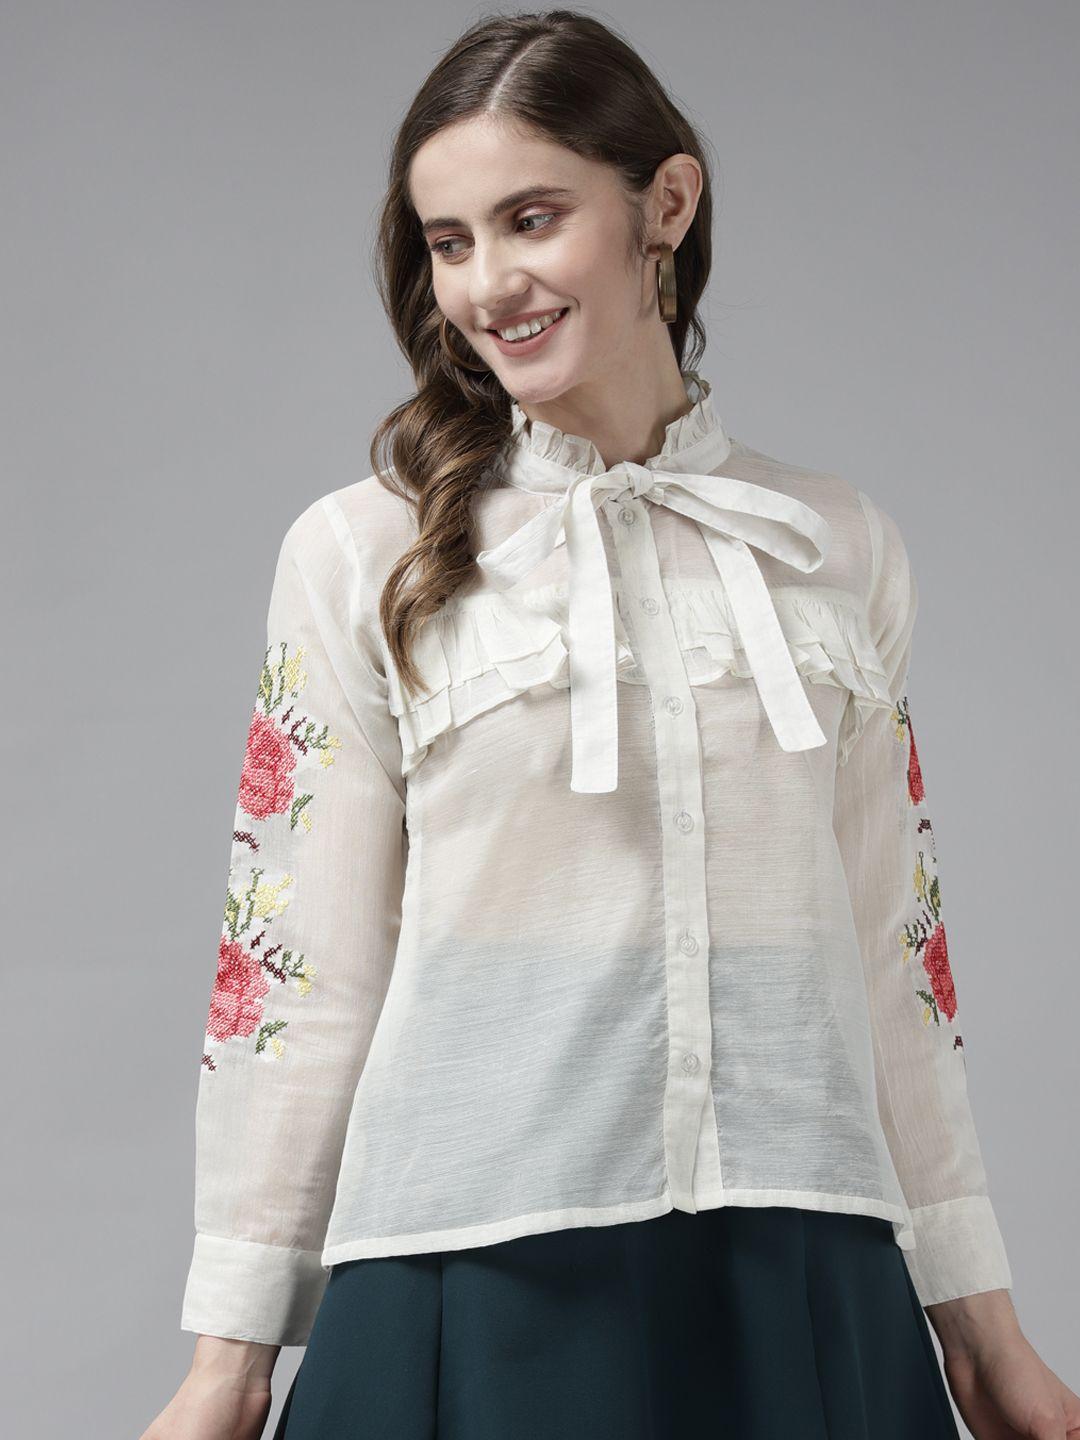 bhama-couture-off-white-embroidered-tie-up-neck-ruffles-shirt-style-top